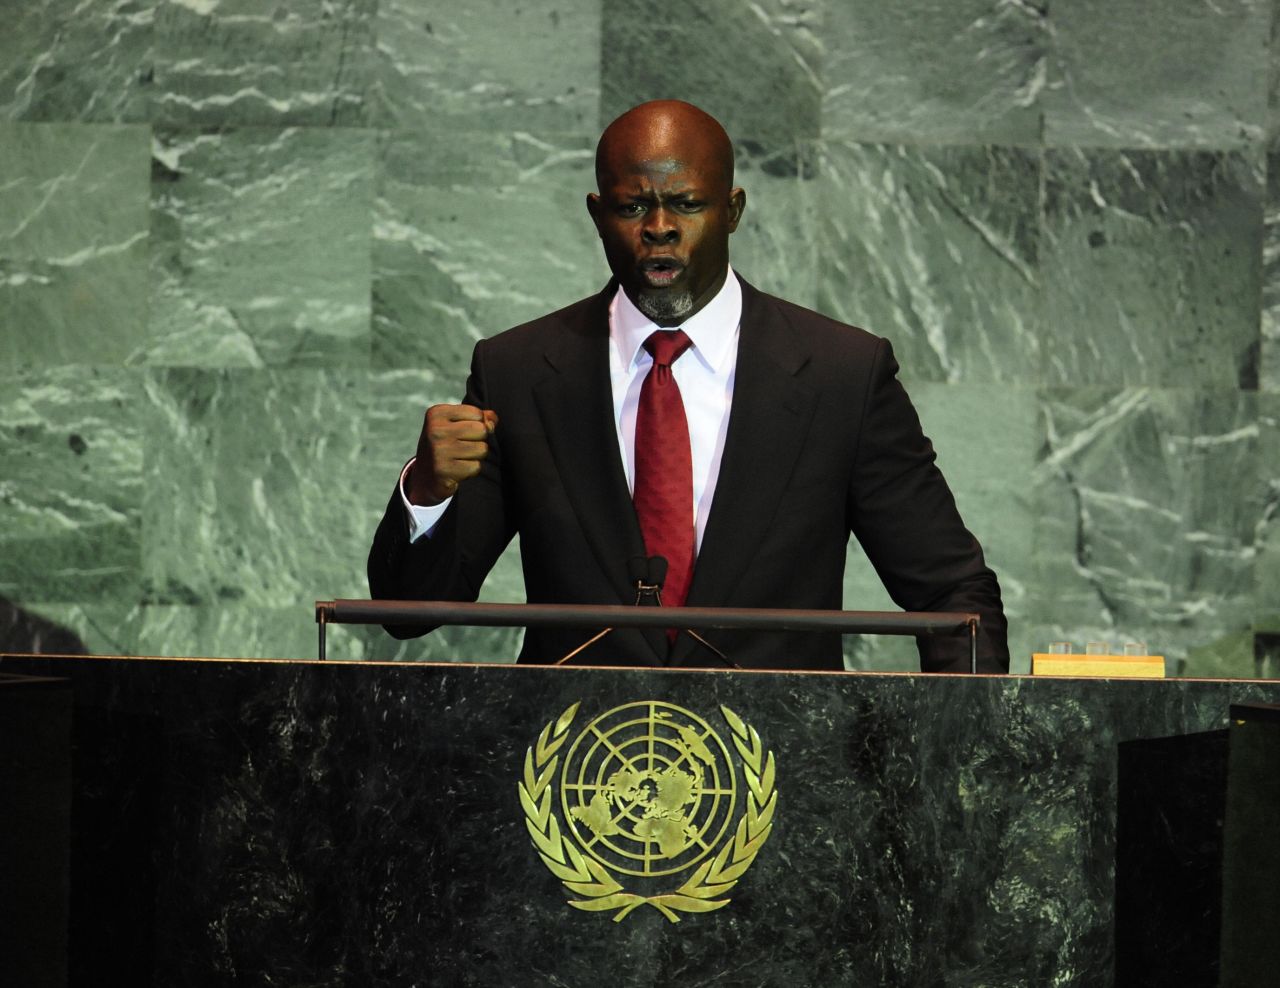 Hounsou, who is a well-known activist, addresses the United Nations' Summit on Climate Change in New York on September 22, 2009.